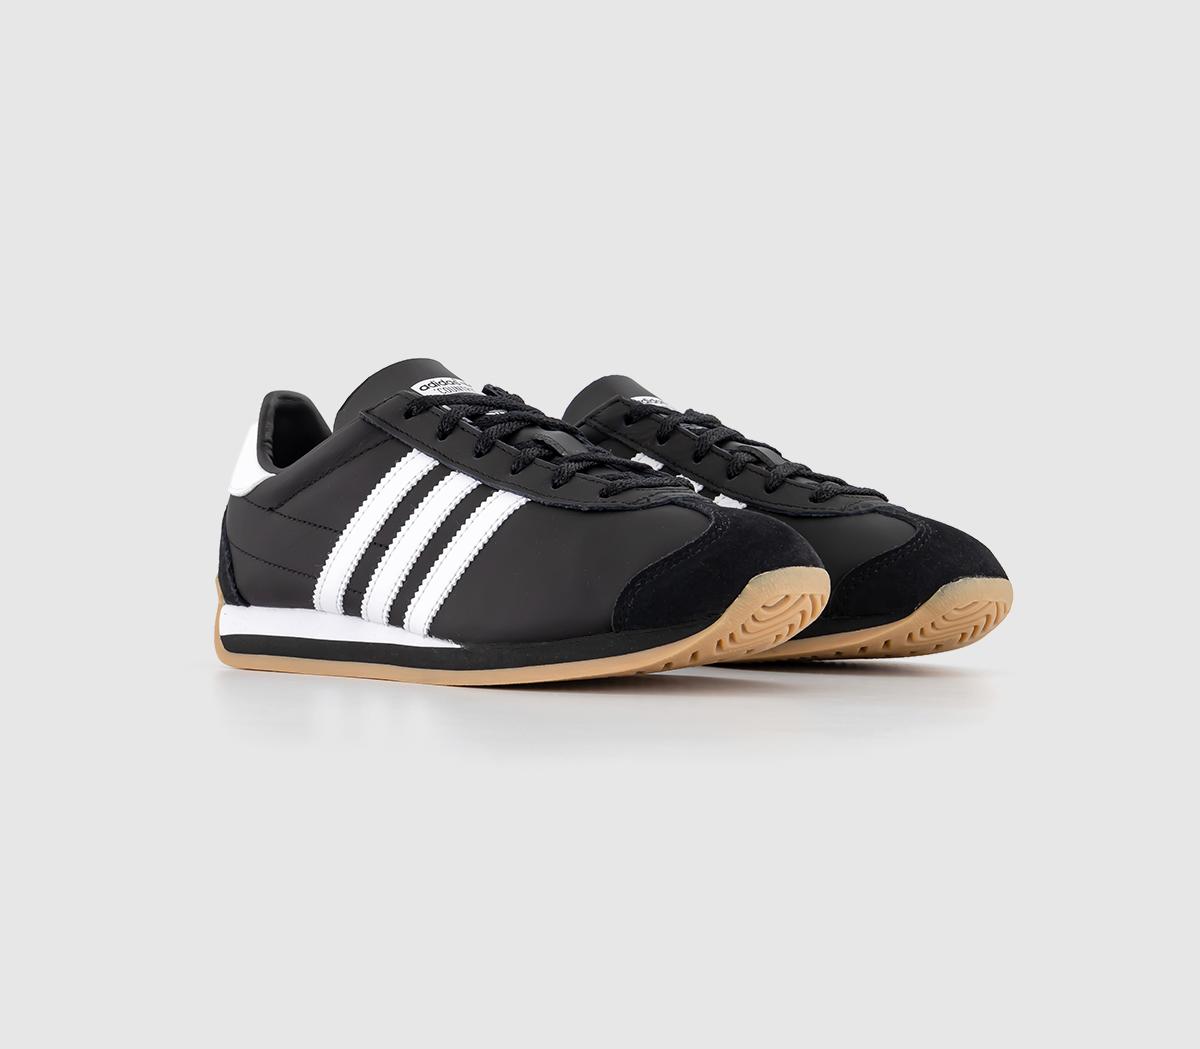 Adidas Country Og Trainers Core Black White, 3.5